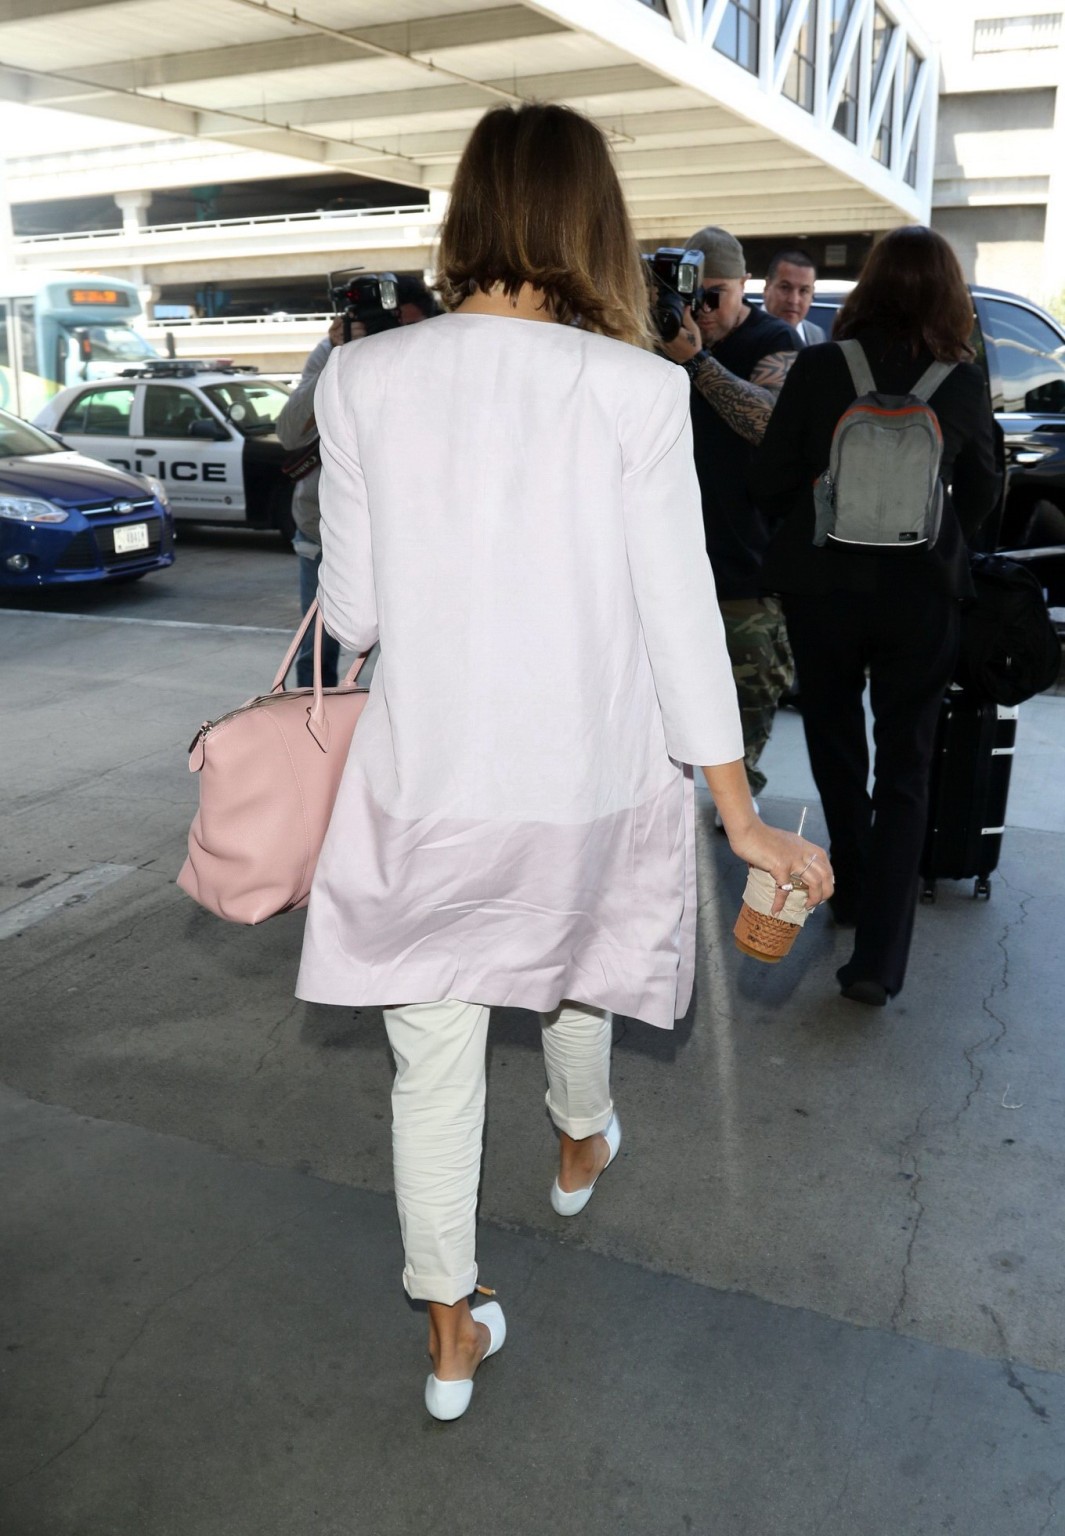 Jessica Alba cleavy wearing a low cut top at LAX Airport #75165003